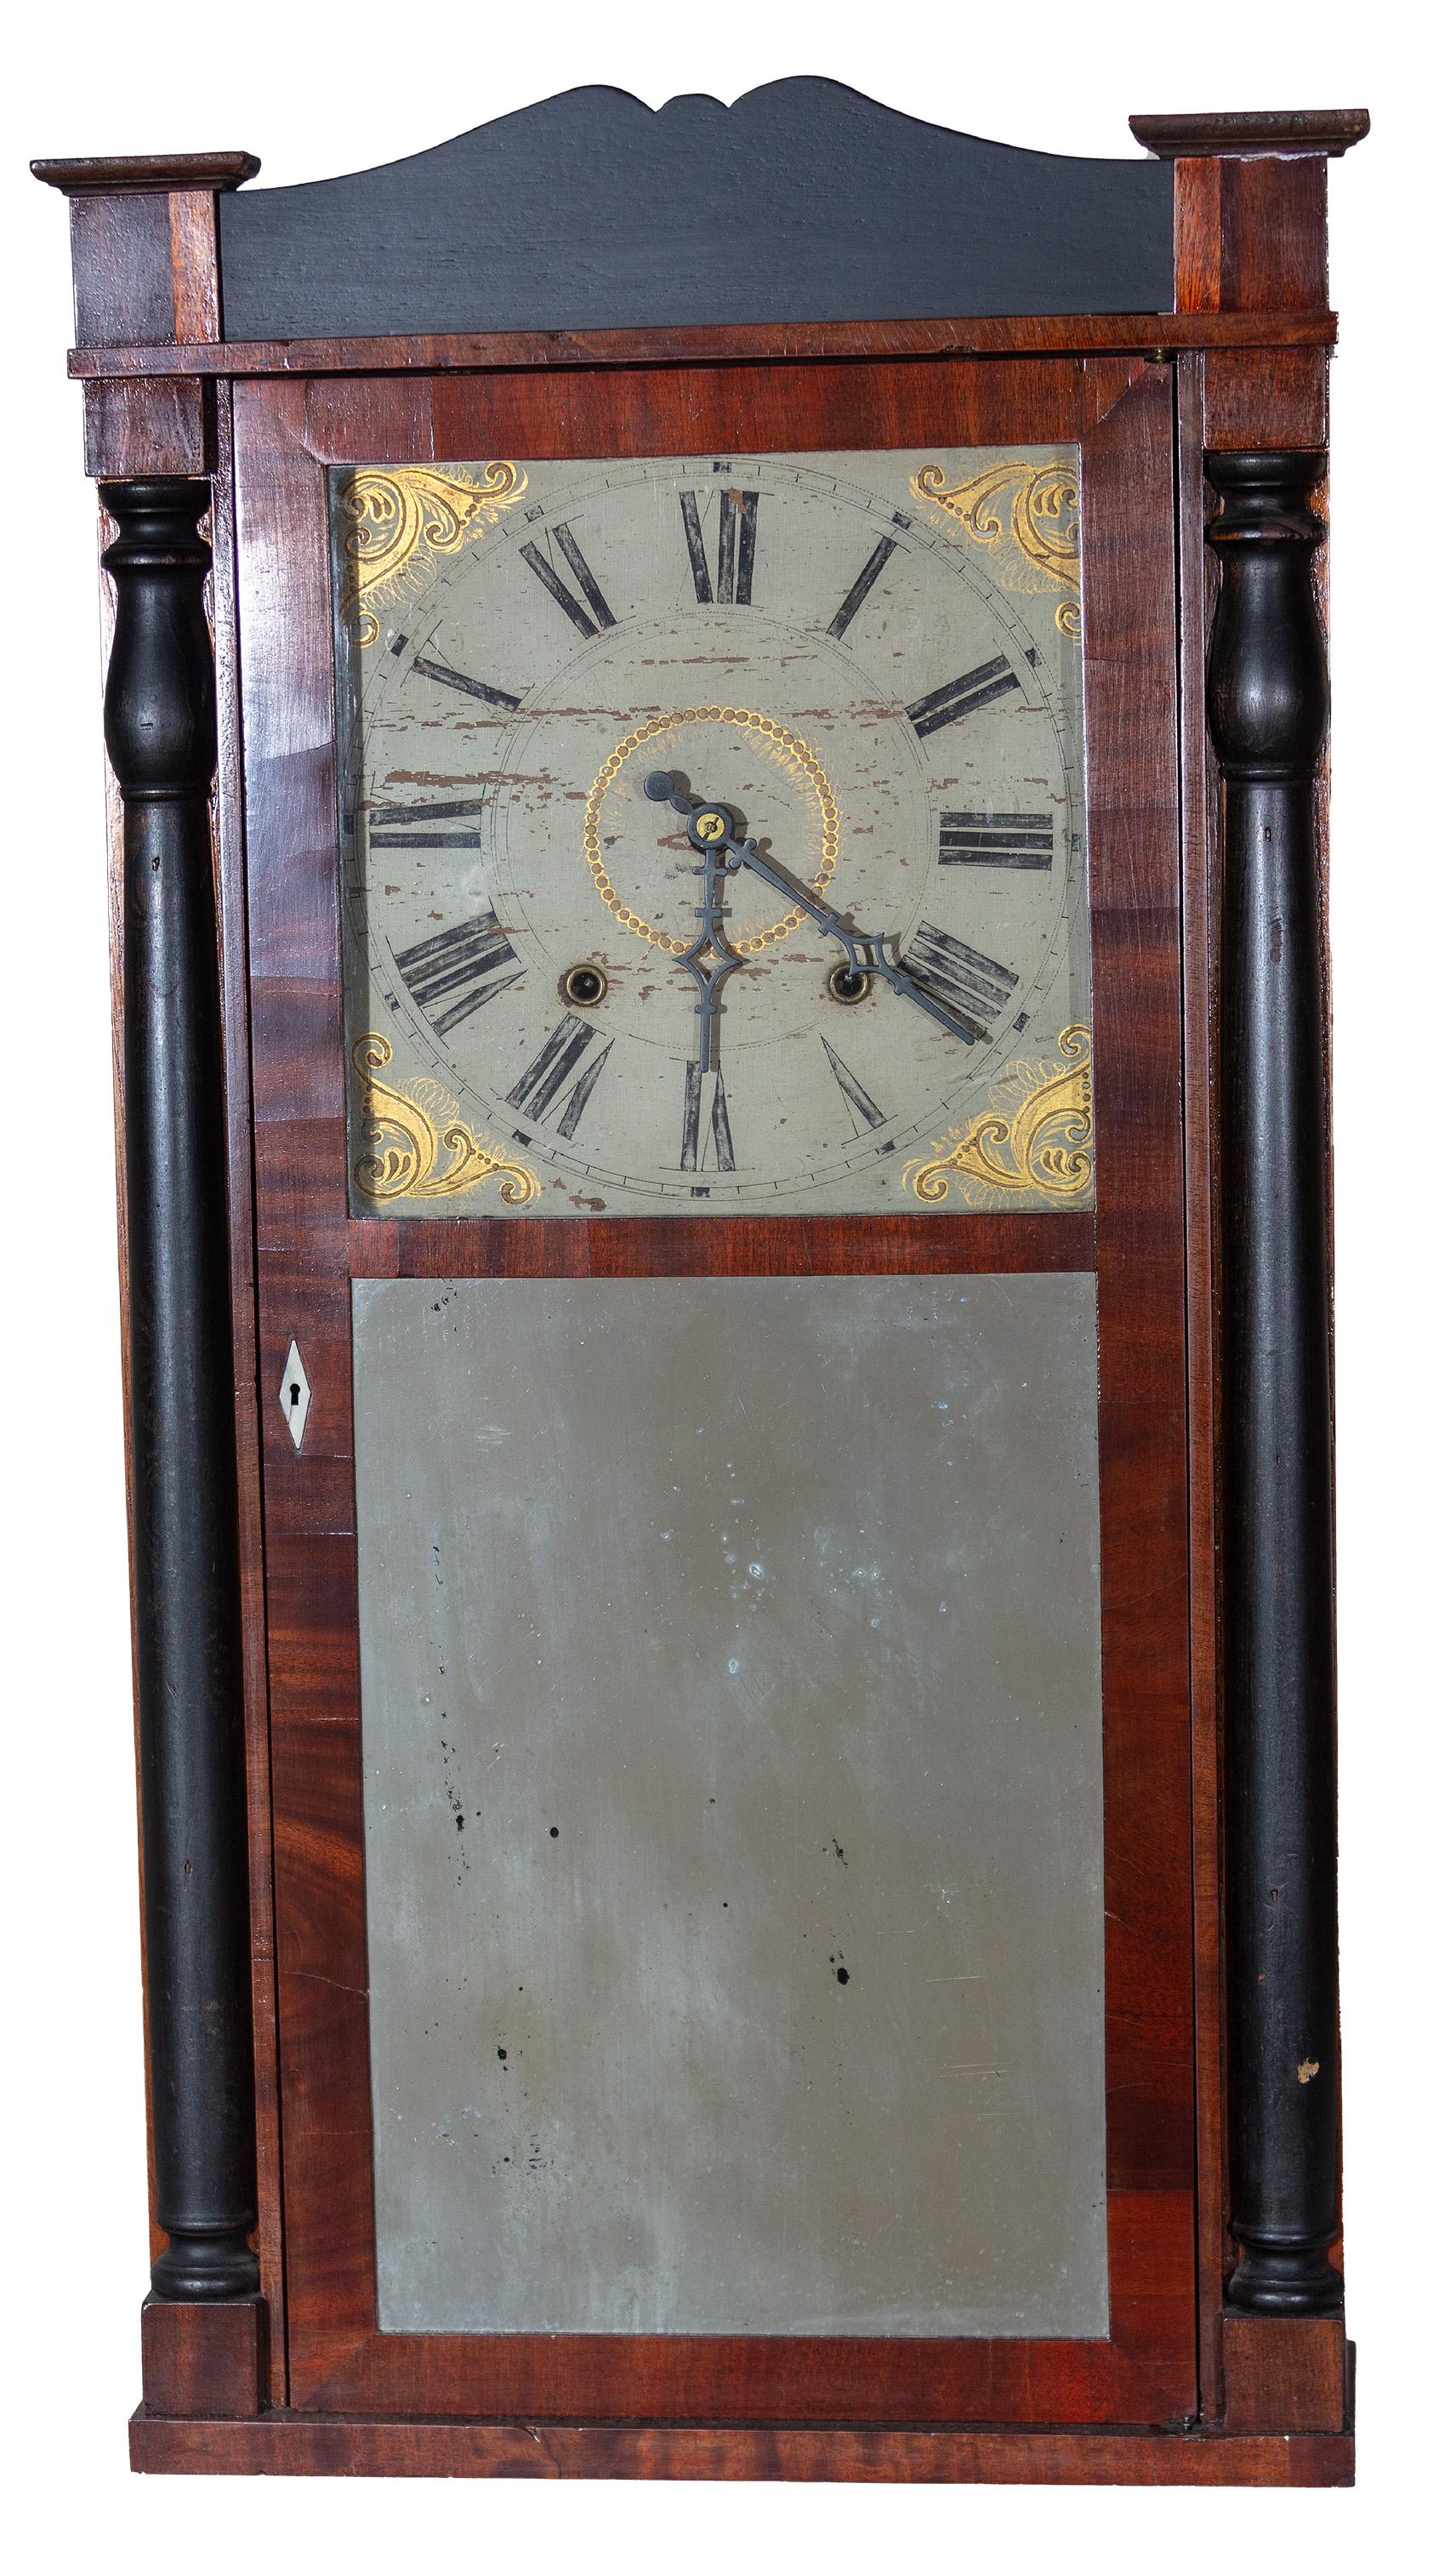 "30 Hour Clock, " Wooden Gears with Original Face, Glass, & Mirror